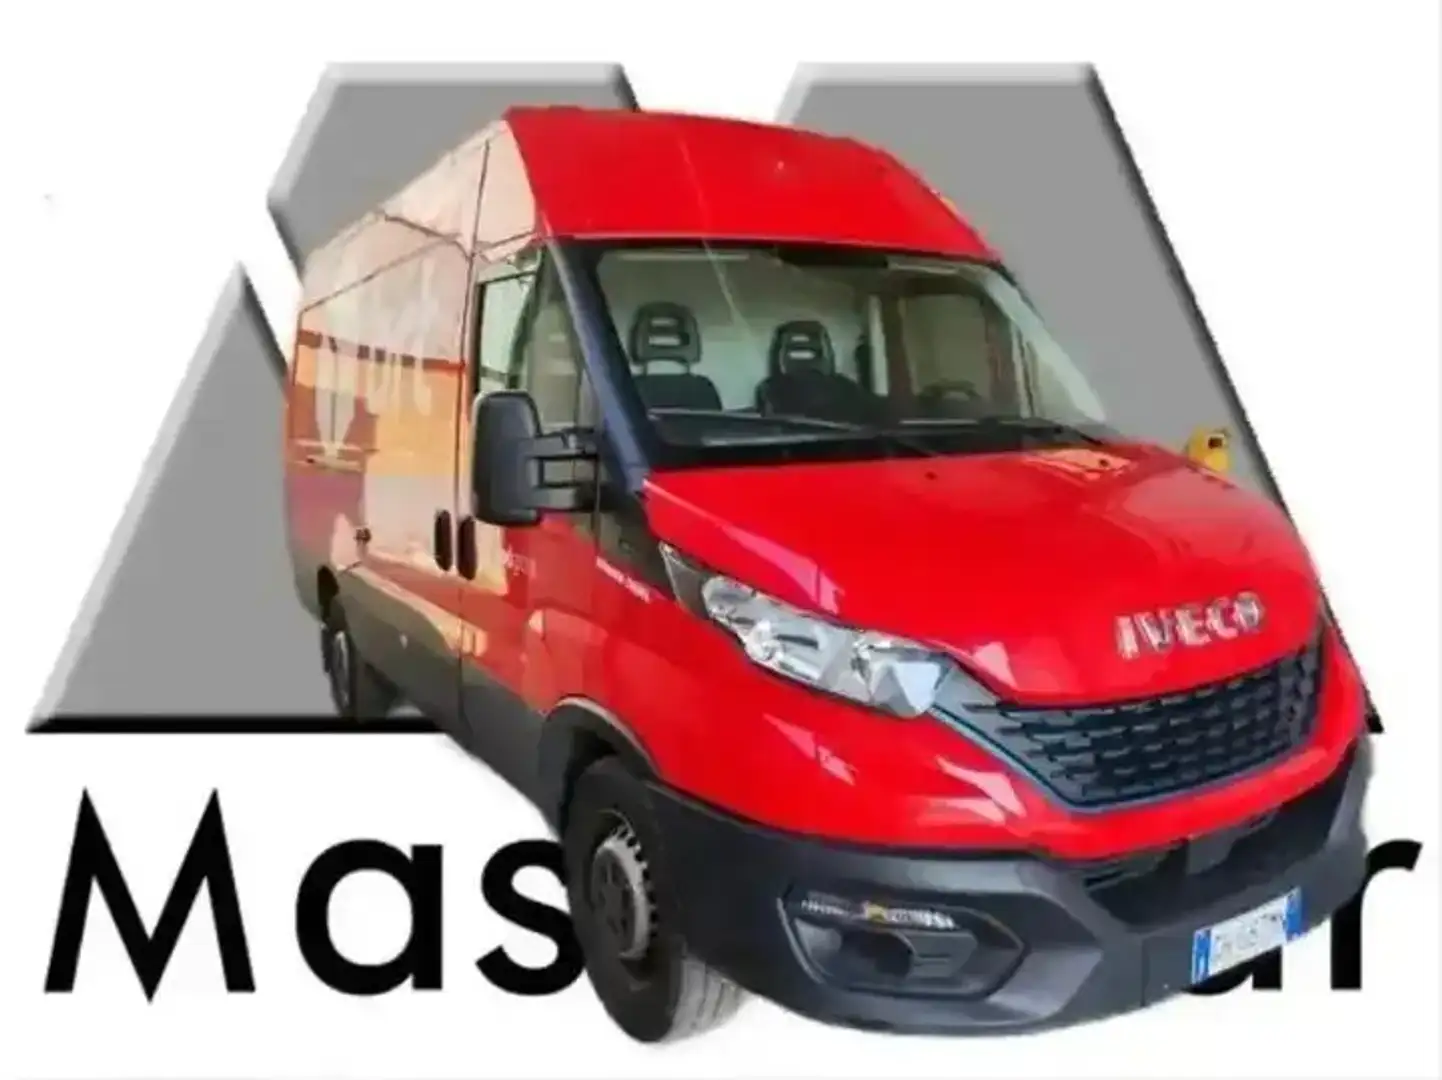 Iveco Daily 35S14NV 3.0 NATURAL POWER PM-SL-TM  TG : GH687MN Rojo - 1